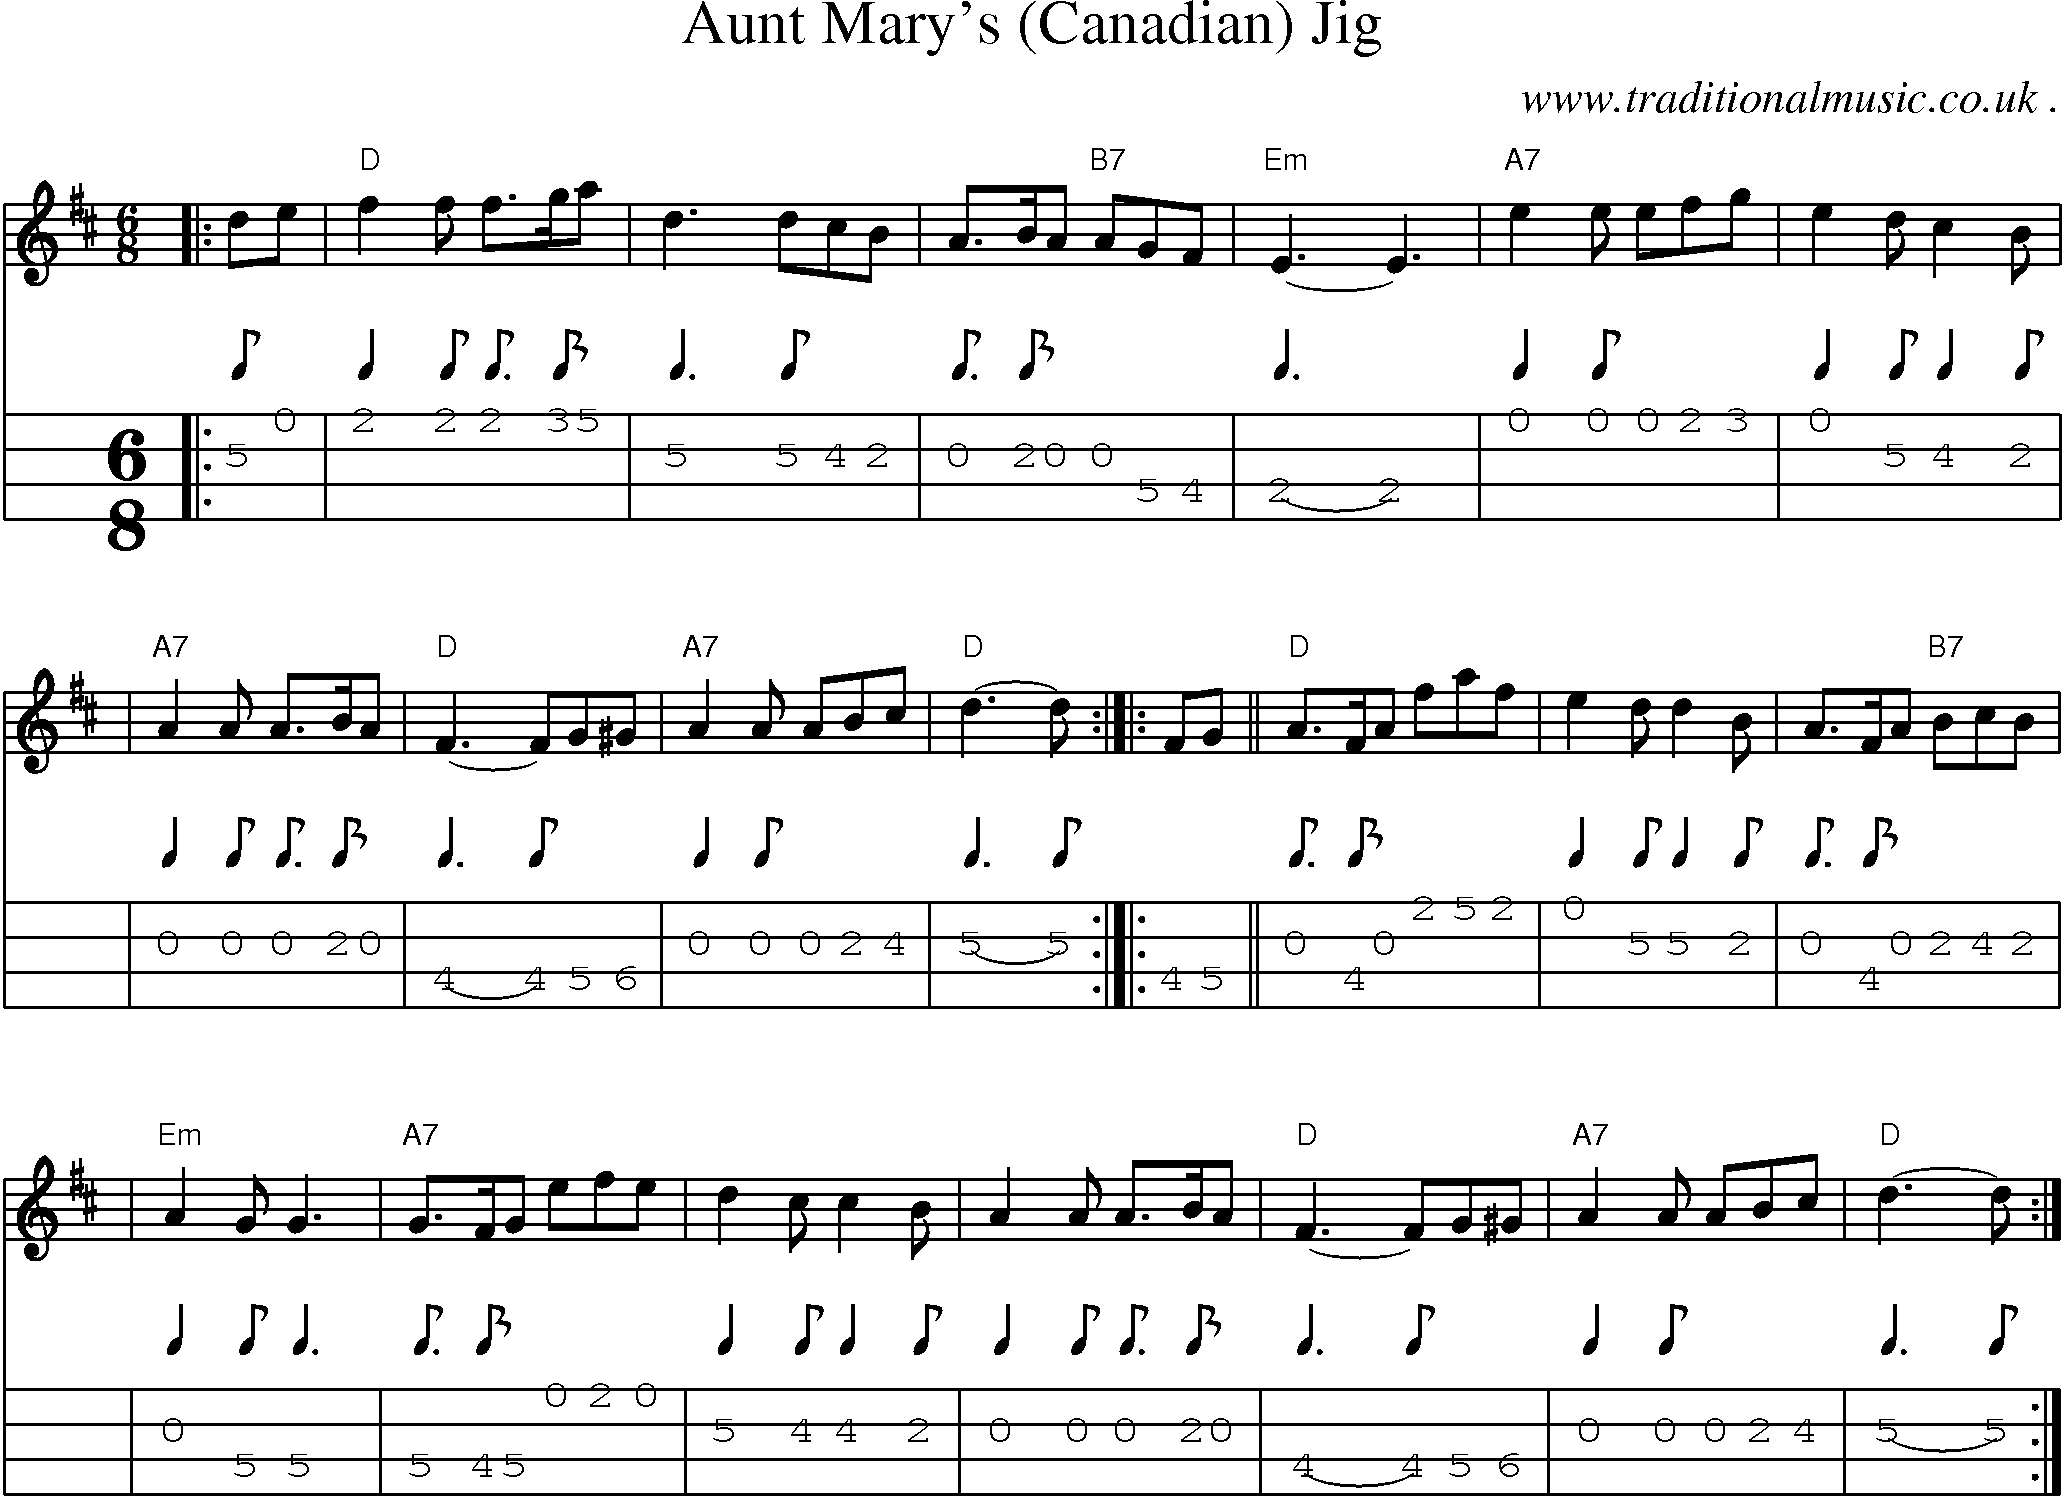 Sheet-music  score, Chords and Mandolin Tabs for Aunt Marys Canadian Jig